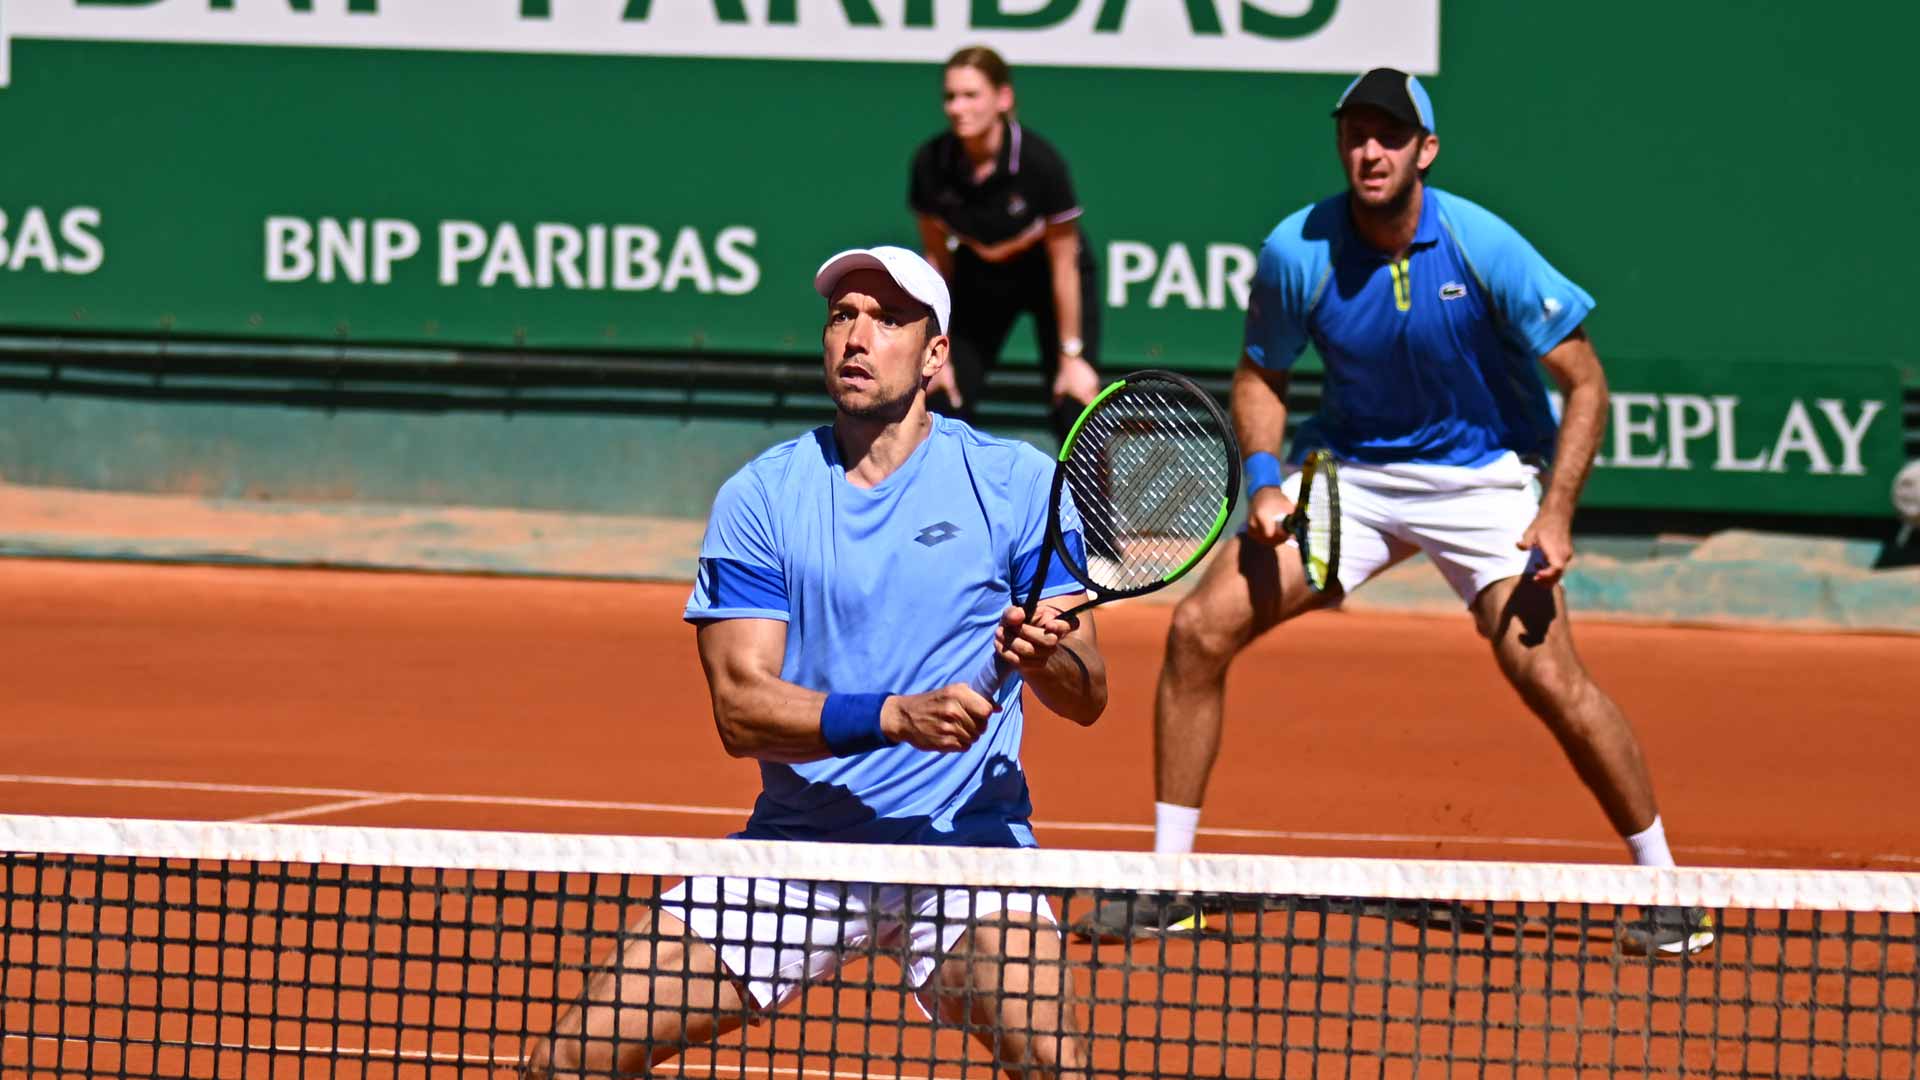 Andreas Mies (at net) and Fabrice Martin during Friday's Monte-Carlo doubles action.